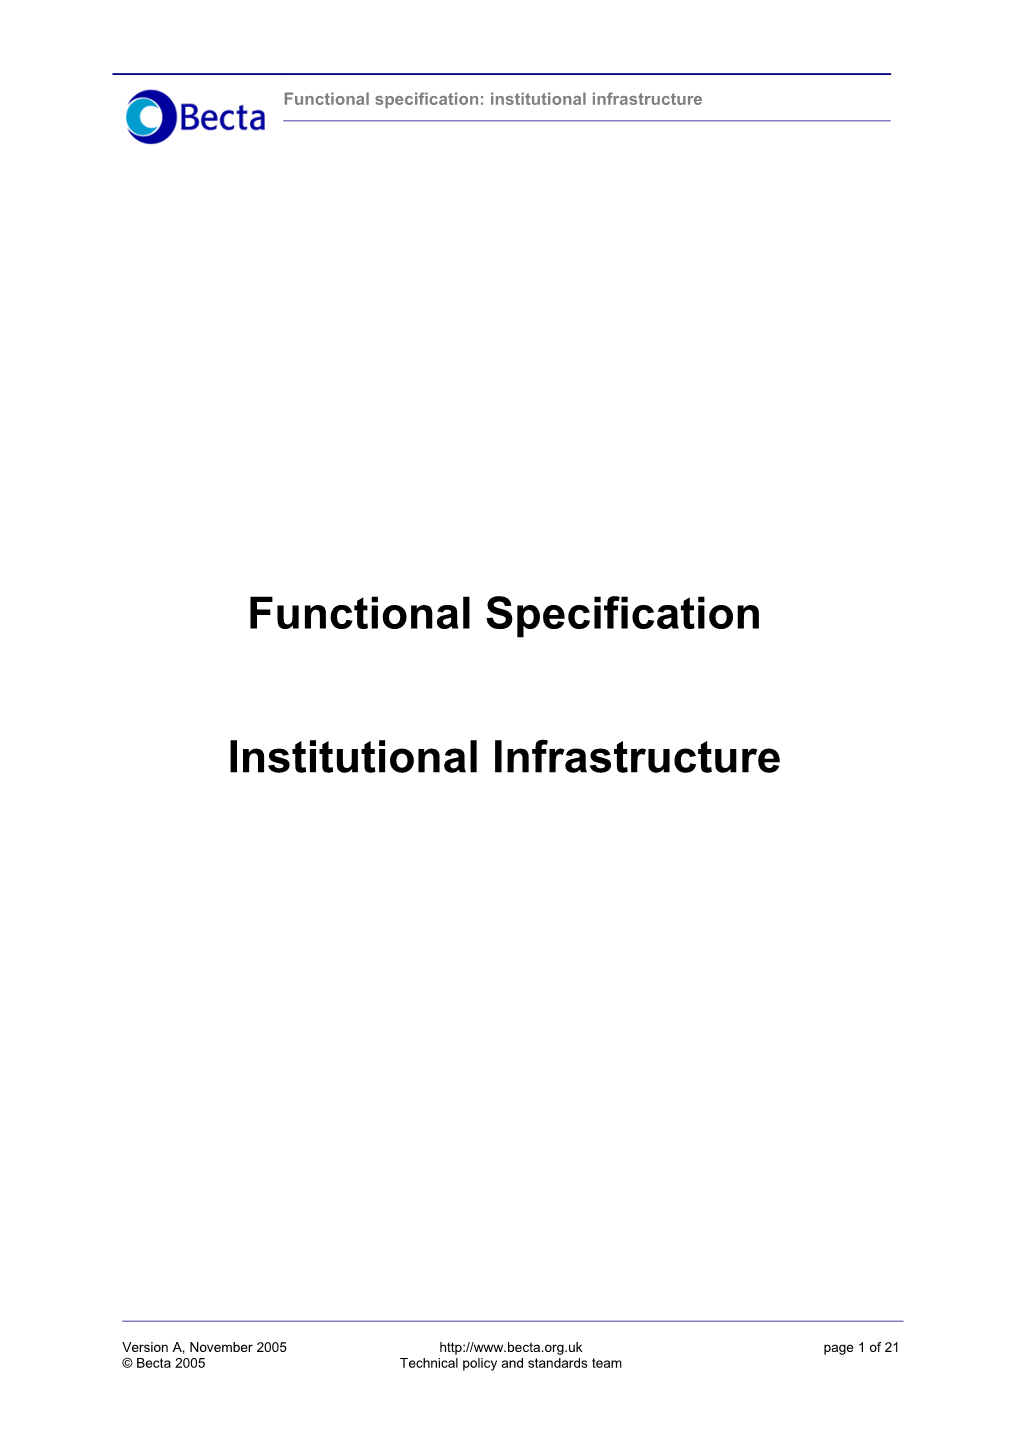 Functional Specification: Institutional Infrastructure